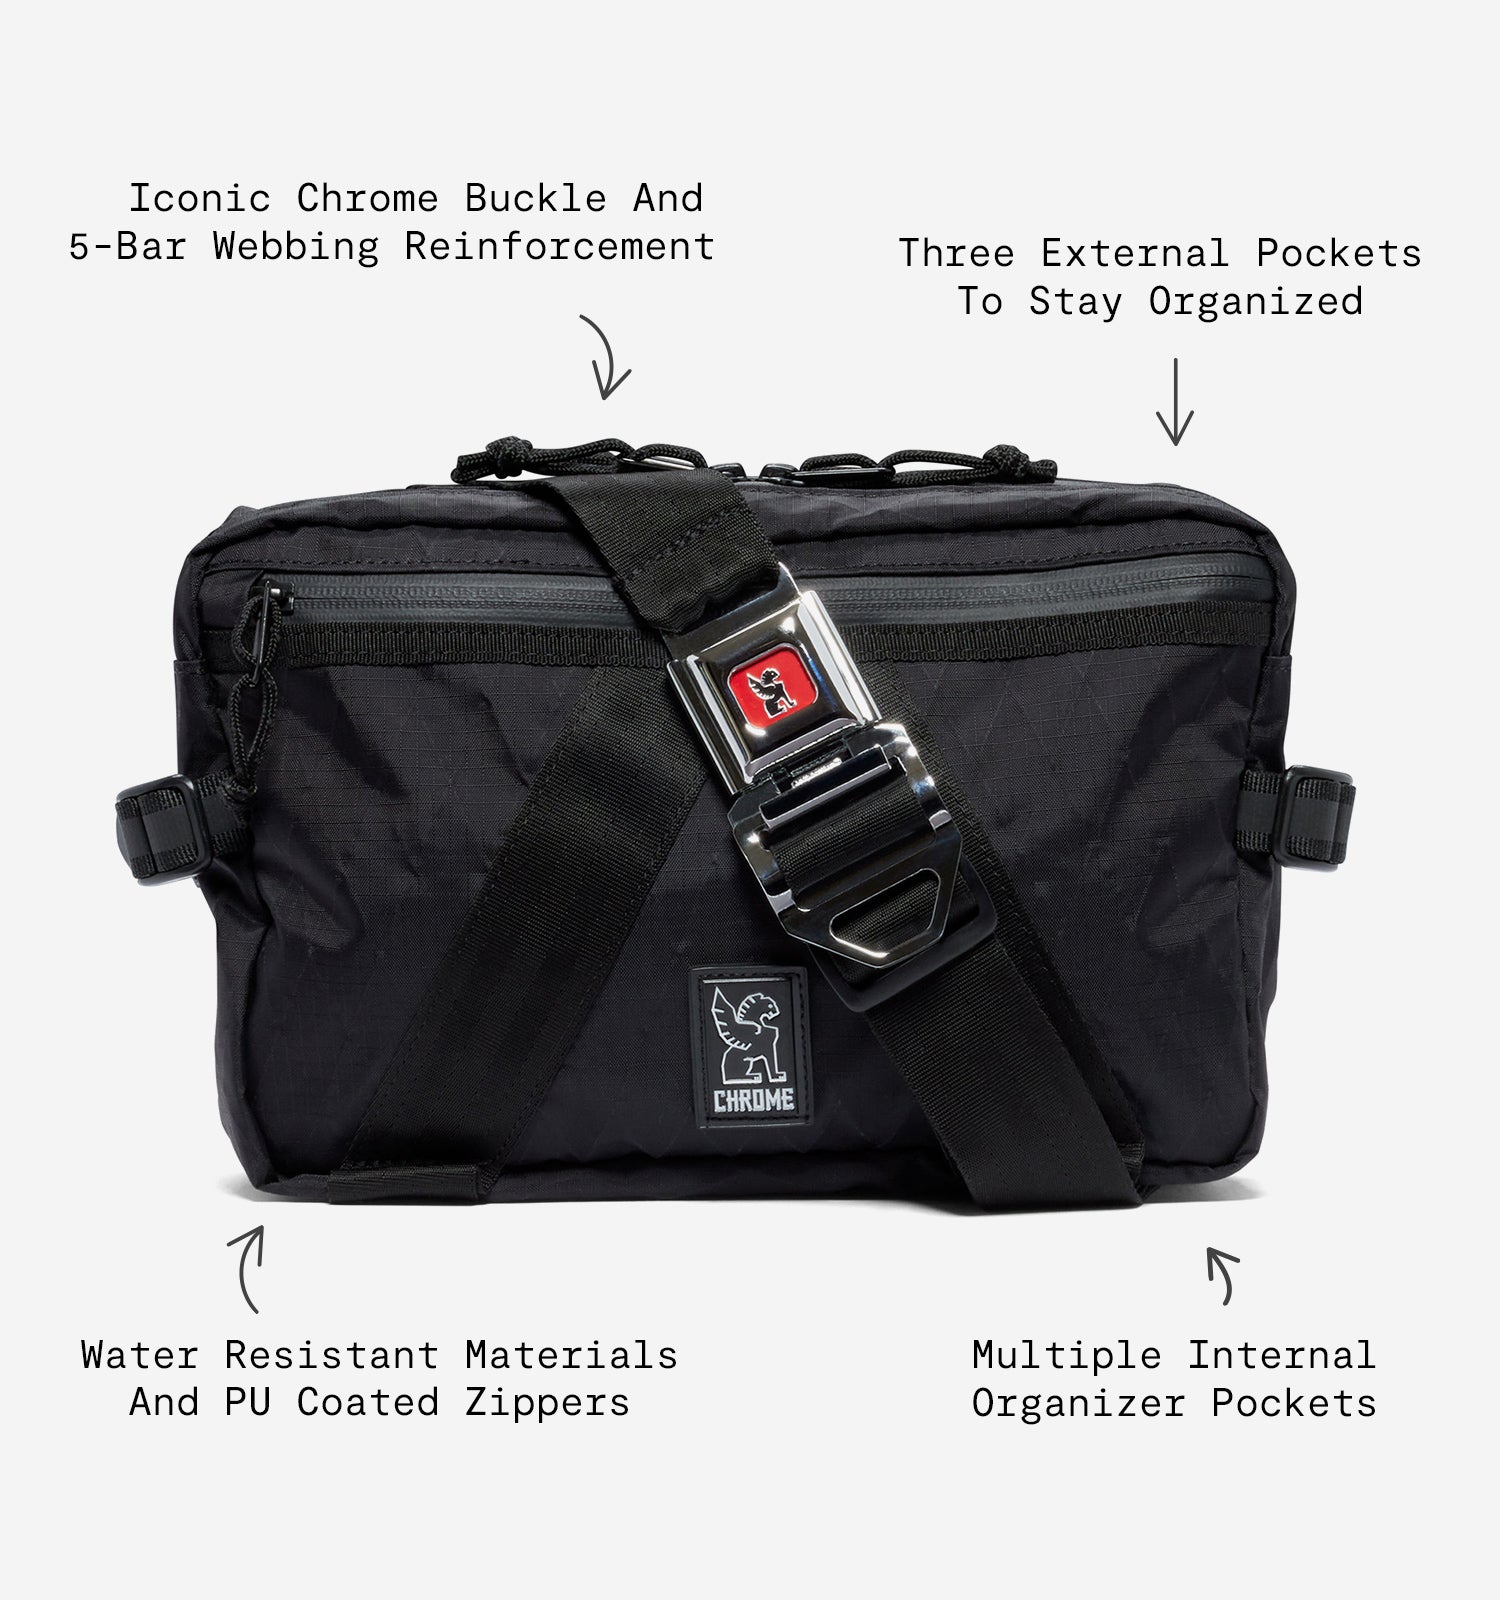 Tensile Sling bag in black  features called out